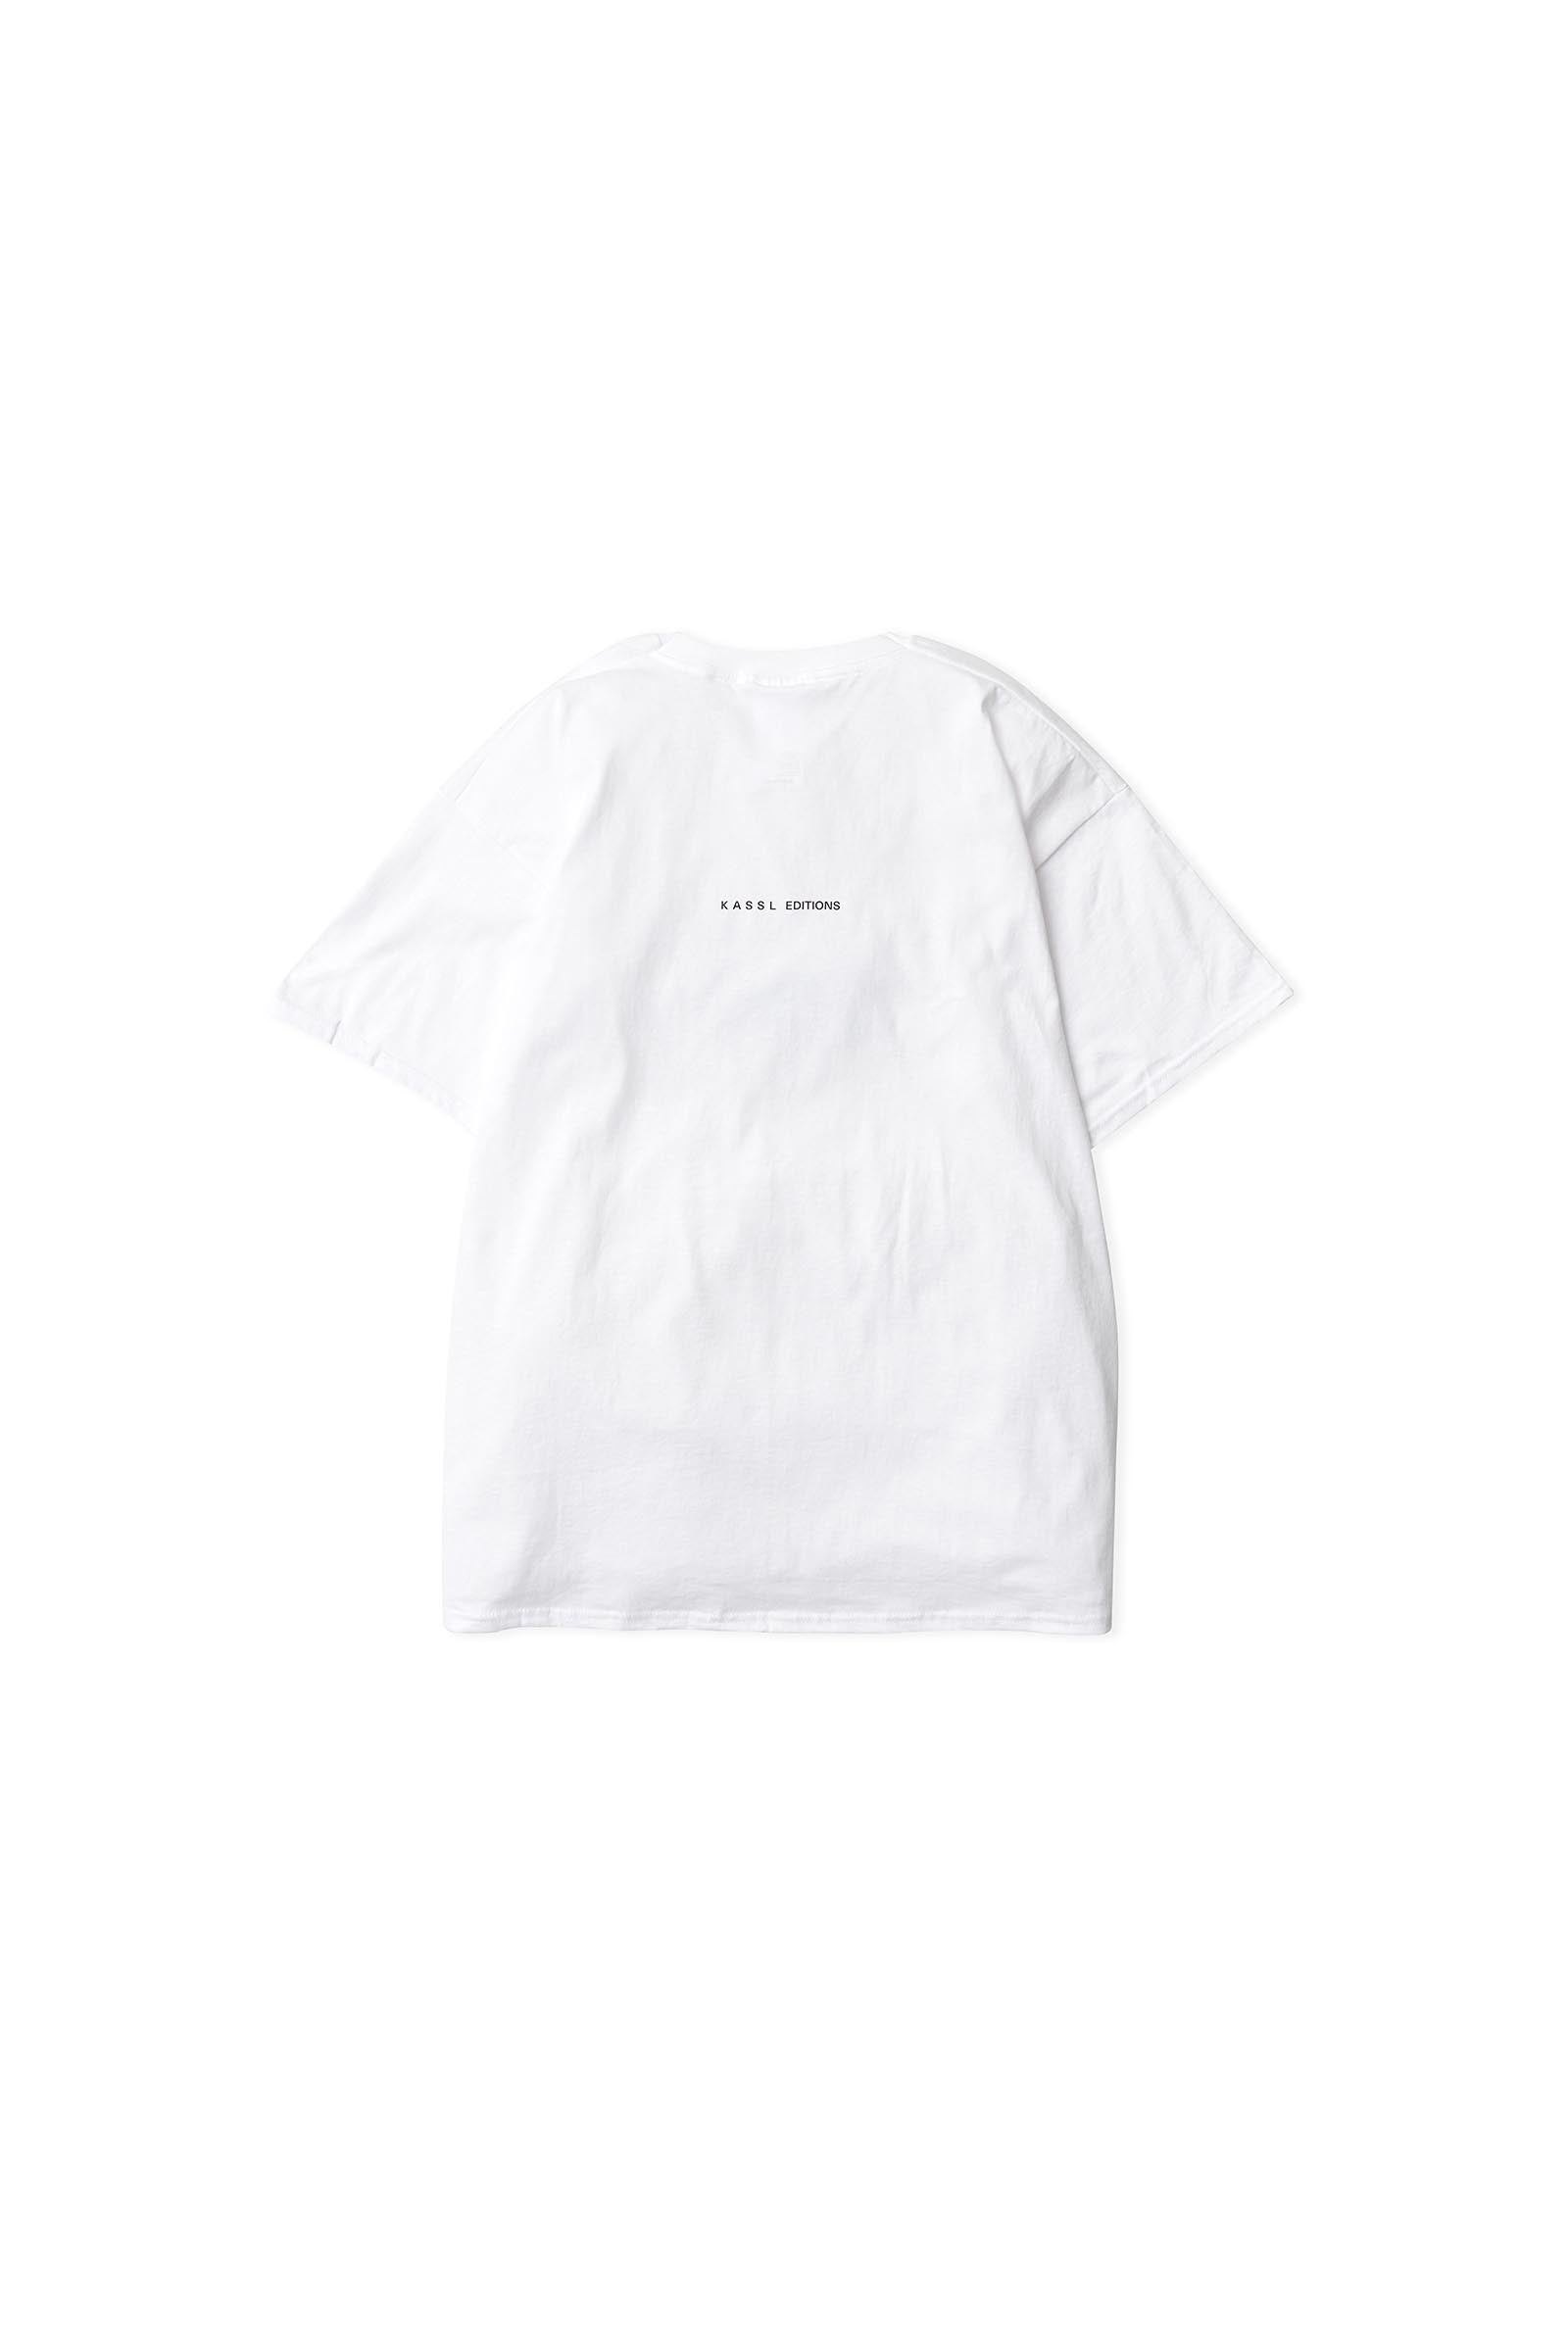 KASSL EDITIONS / Tee cotton white rubber